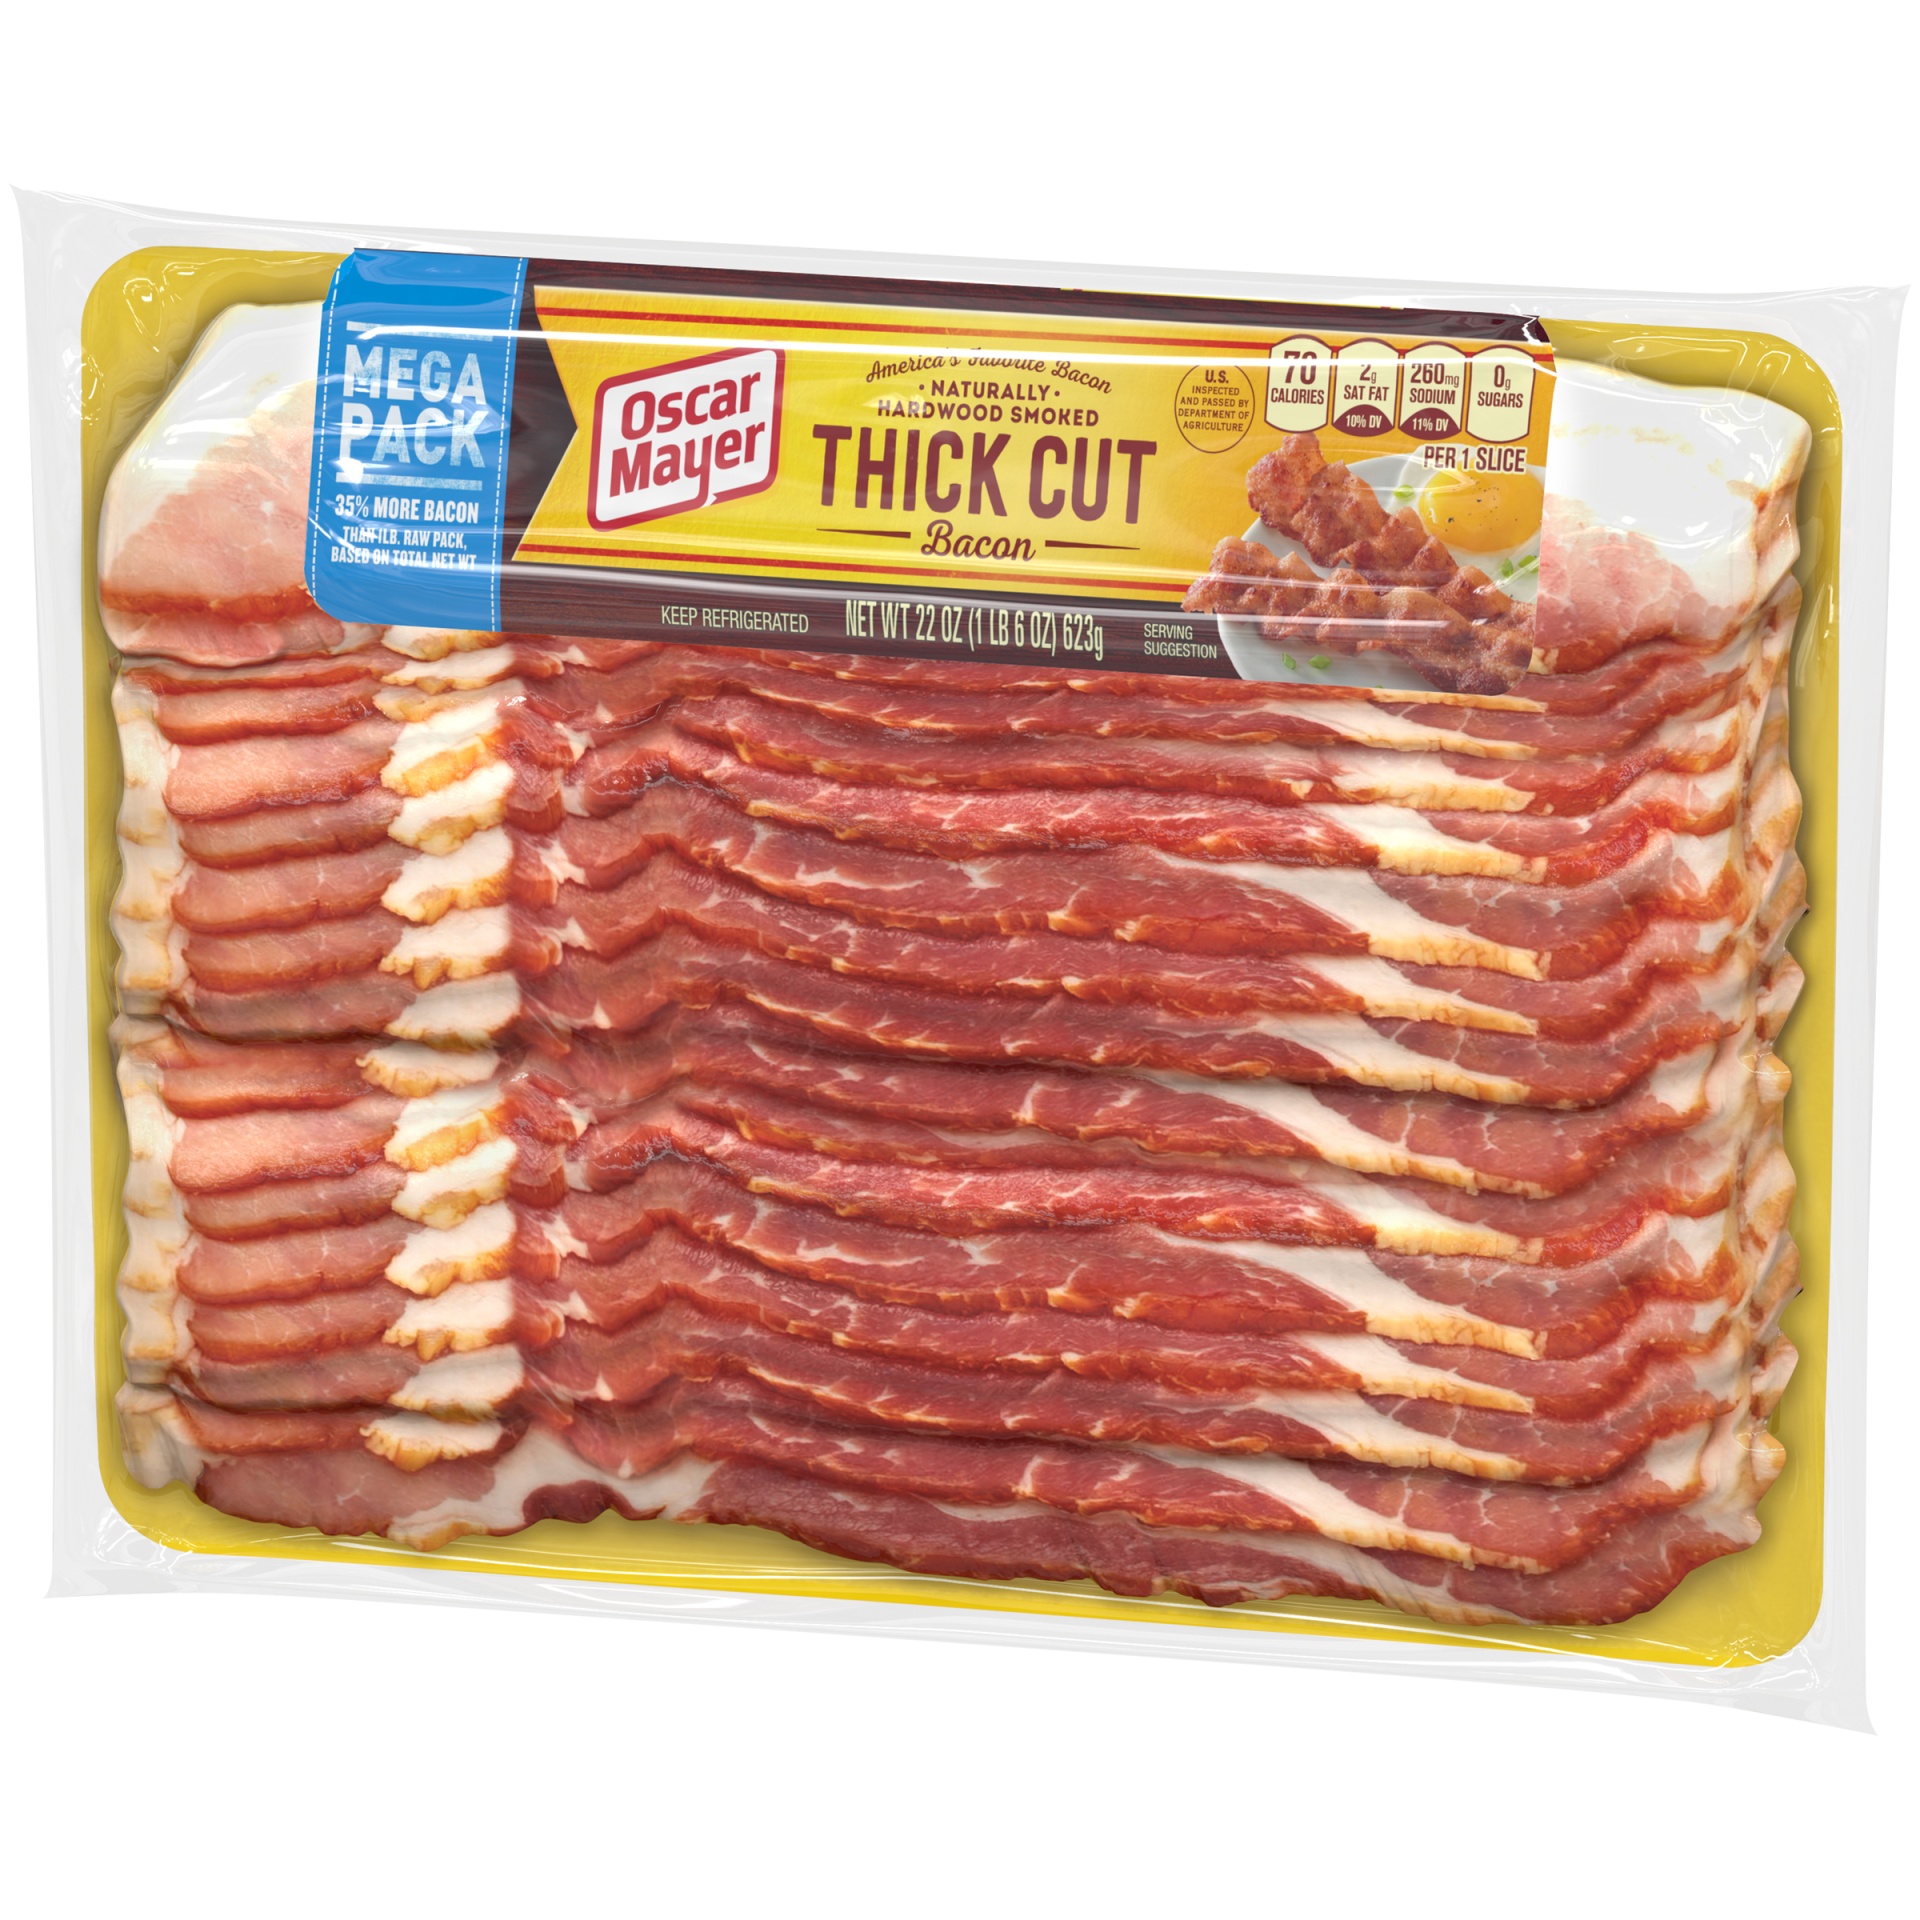 slide 4 of 7, Oscar Mayer Naturally Hardwood Smoked Thick Cut Bacon Mega Pack Pack, 15-17 Slices, 22 oz